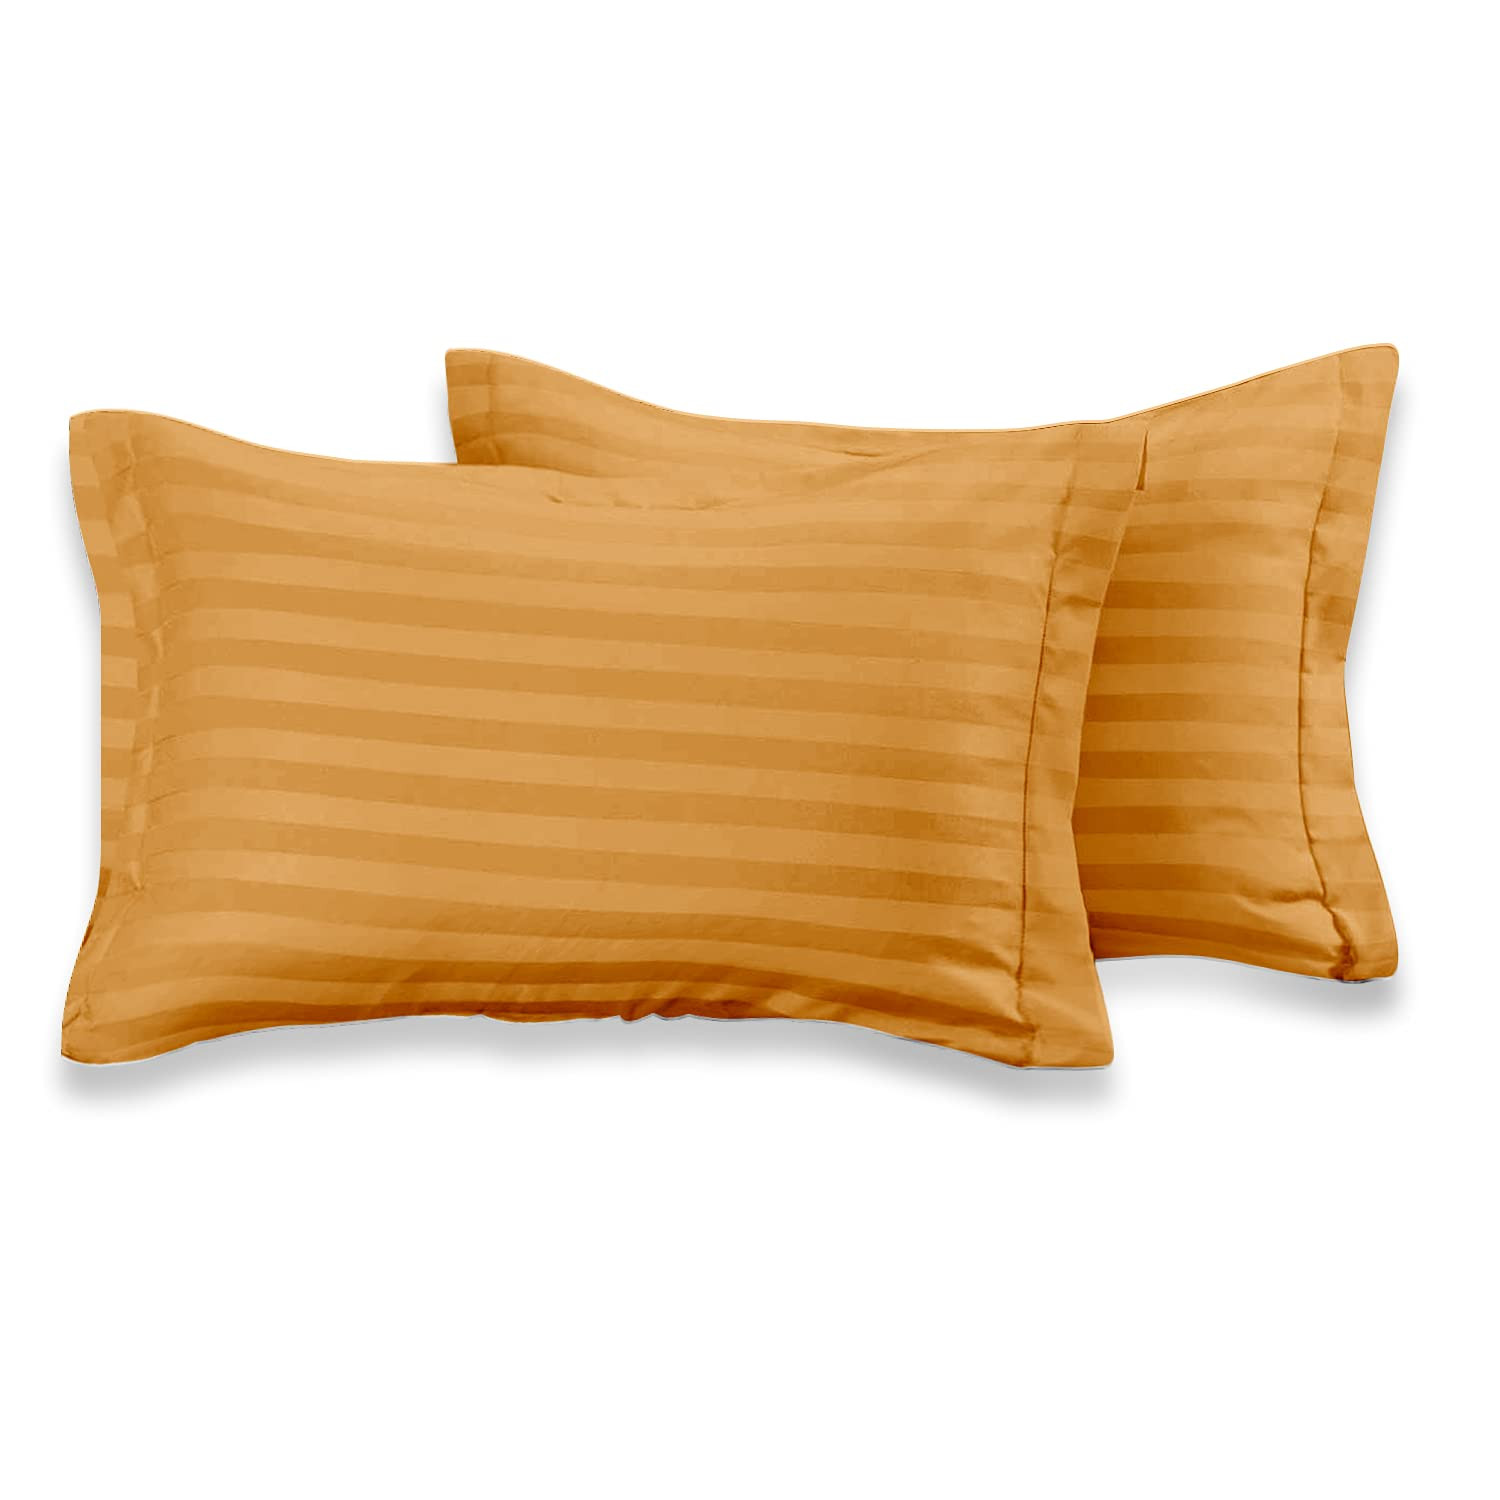 Kuber Industries Lining Design Breathable & Soft Cotton Pillow Cover/Protector/Case- 18x28 Inch,(Coffee)-HS43KUBMART26761